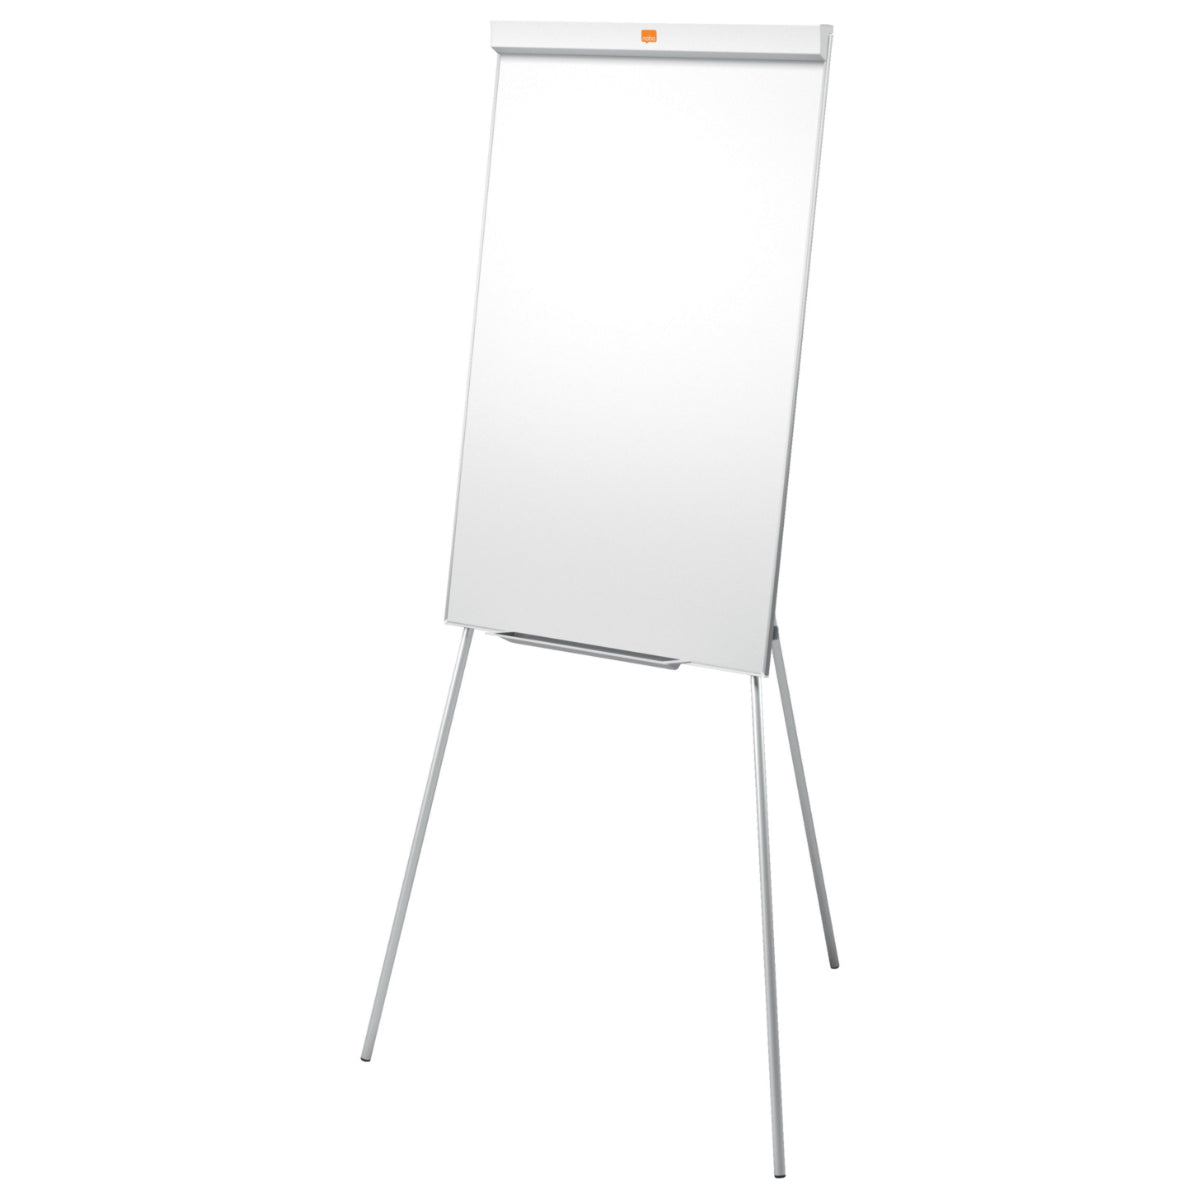 Flip Chart : Buy Online at Best Price in KSA - Souq is now :  Office Products